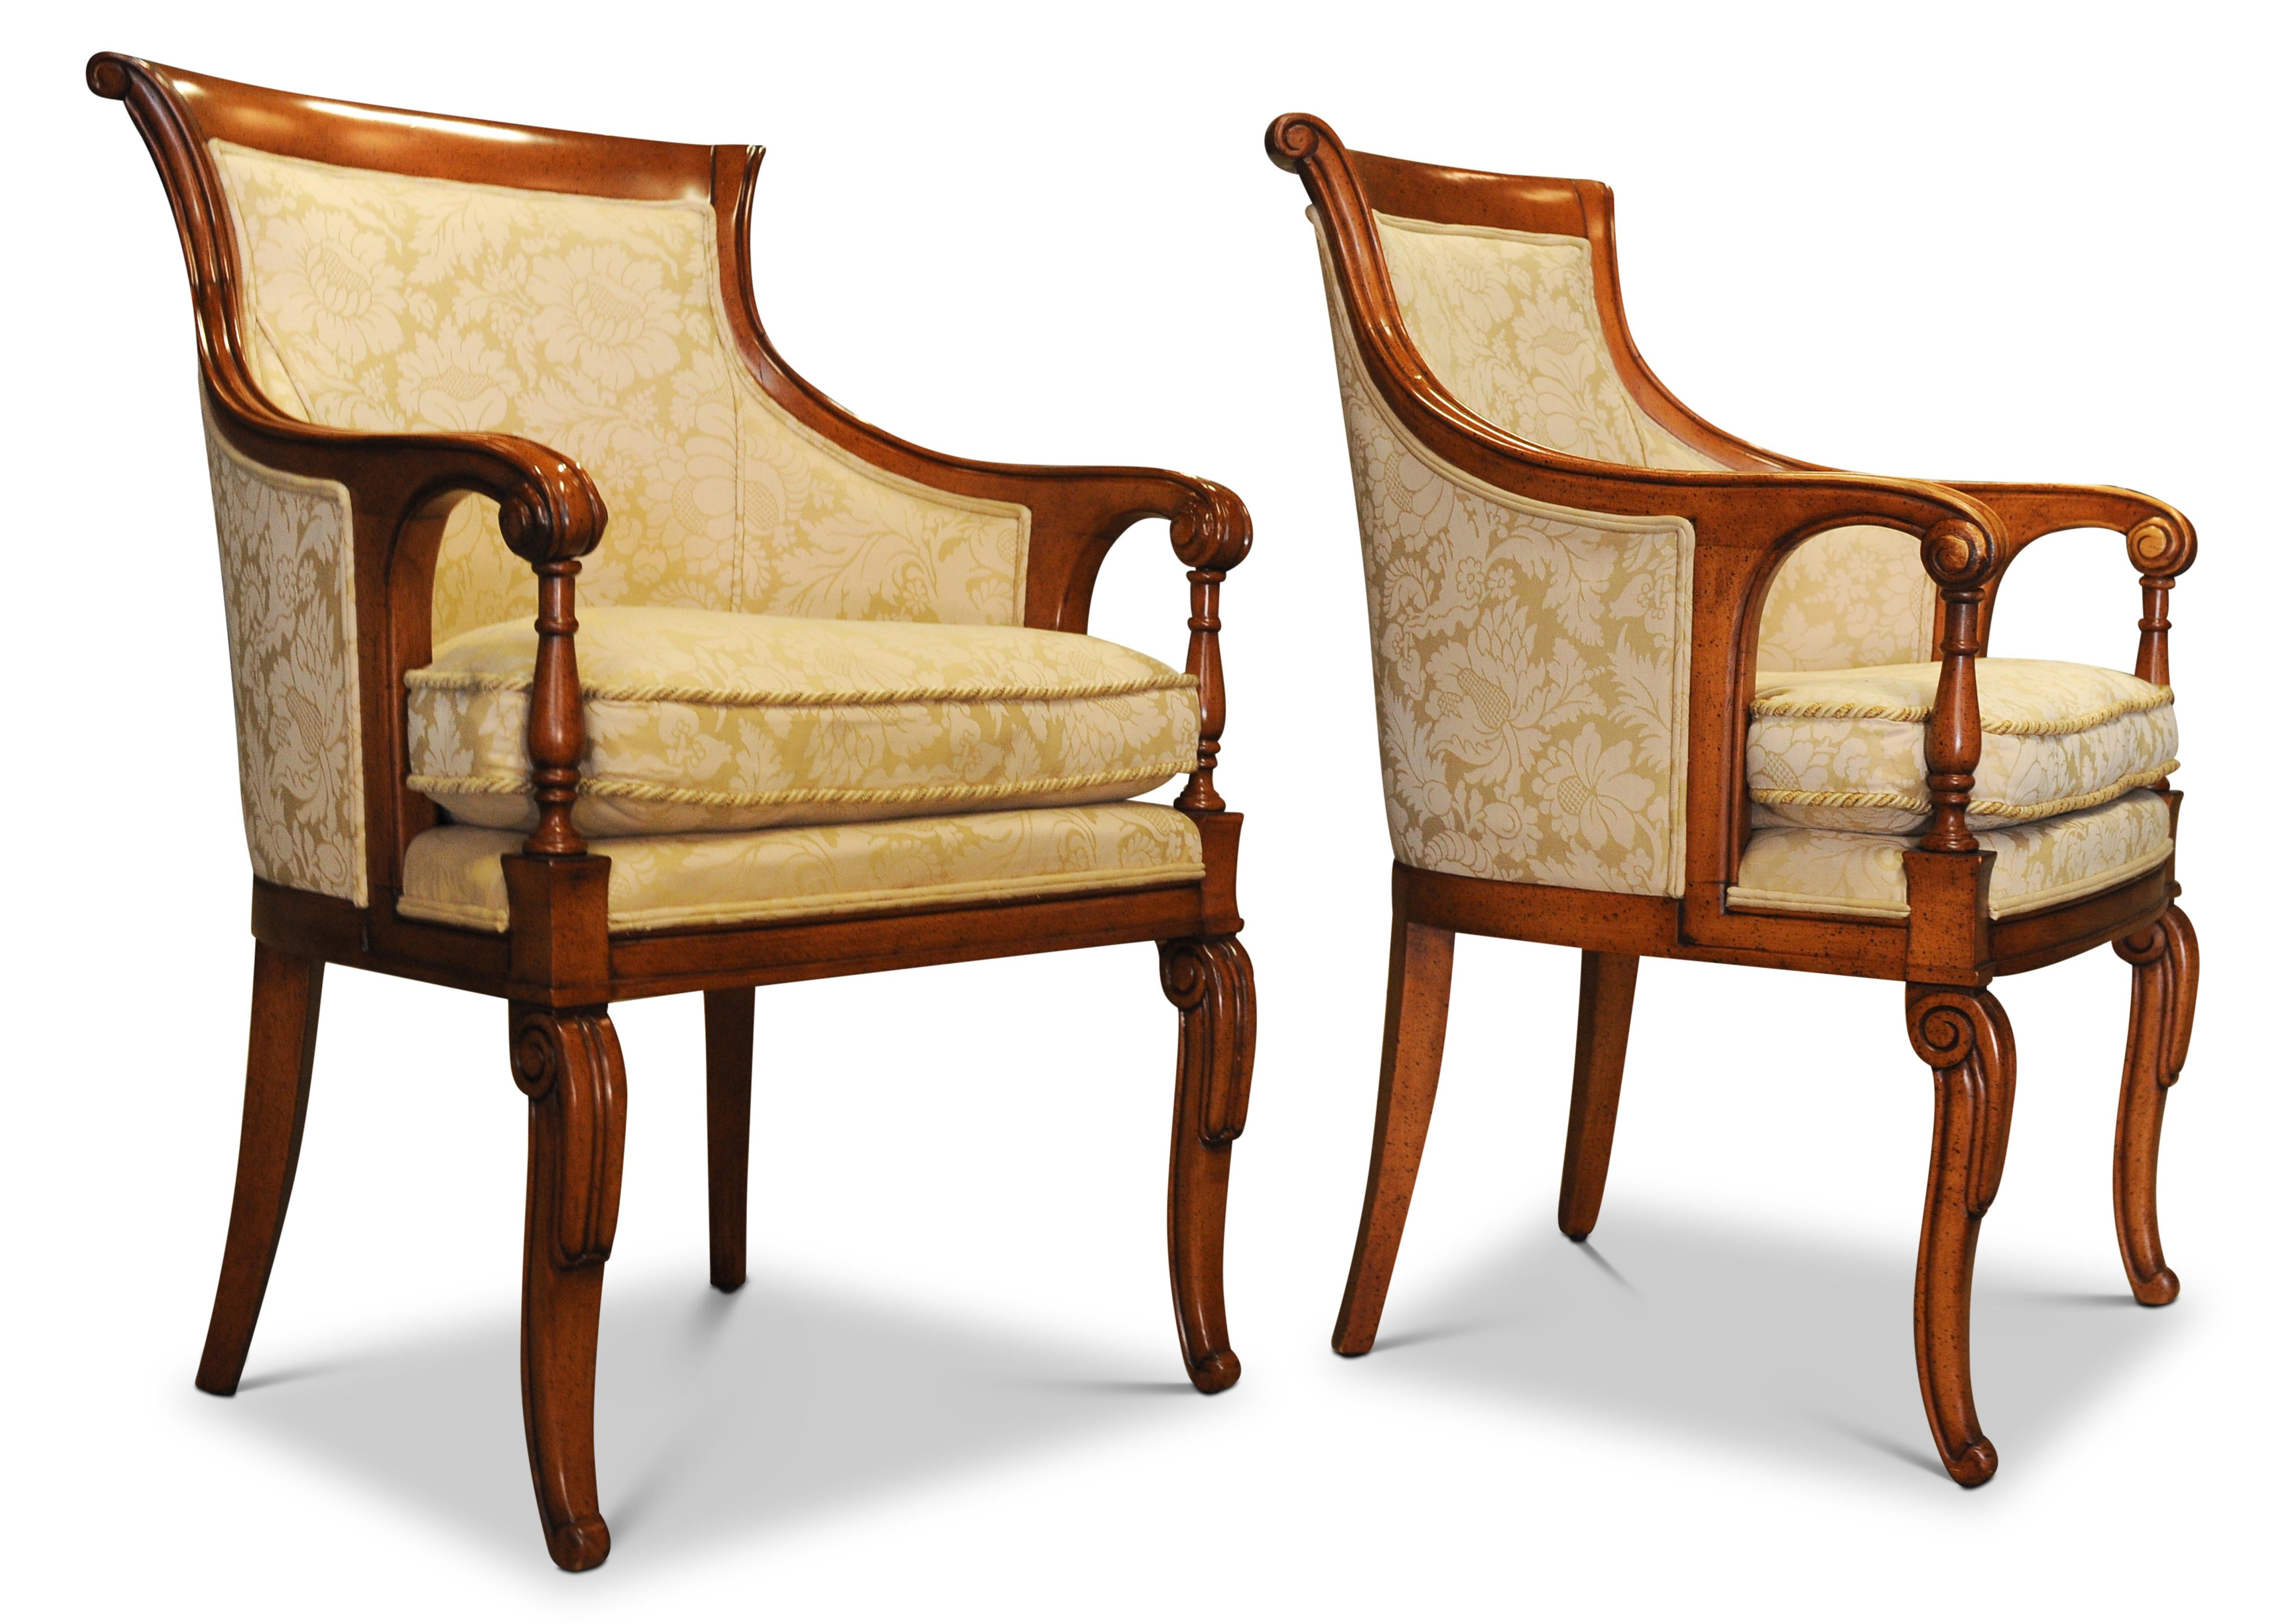 Elegant Pair of William IV Design Bergere Armchairs With Cream Damask Upholstery For Sale 1